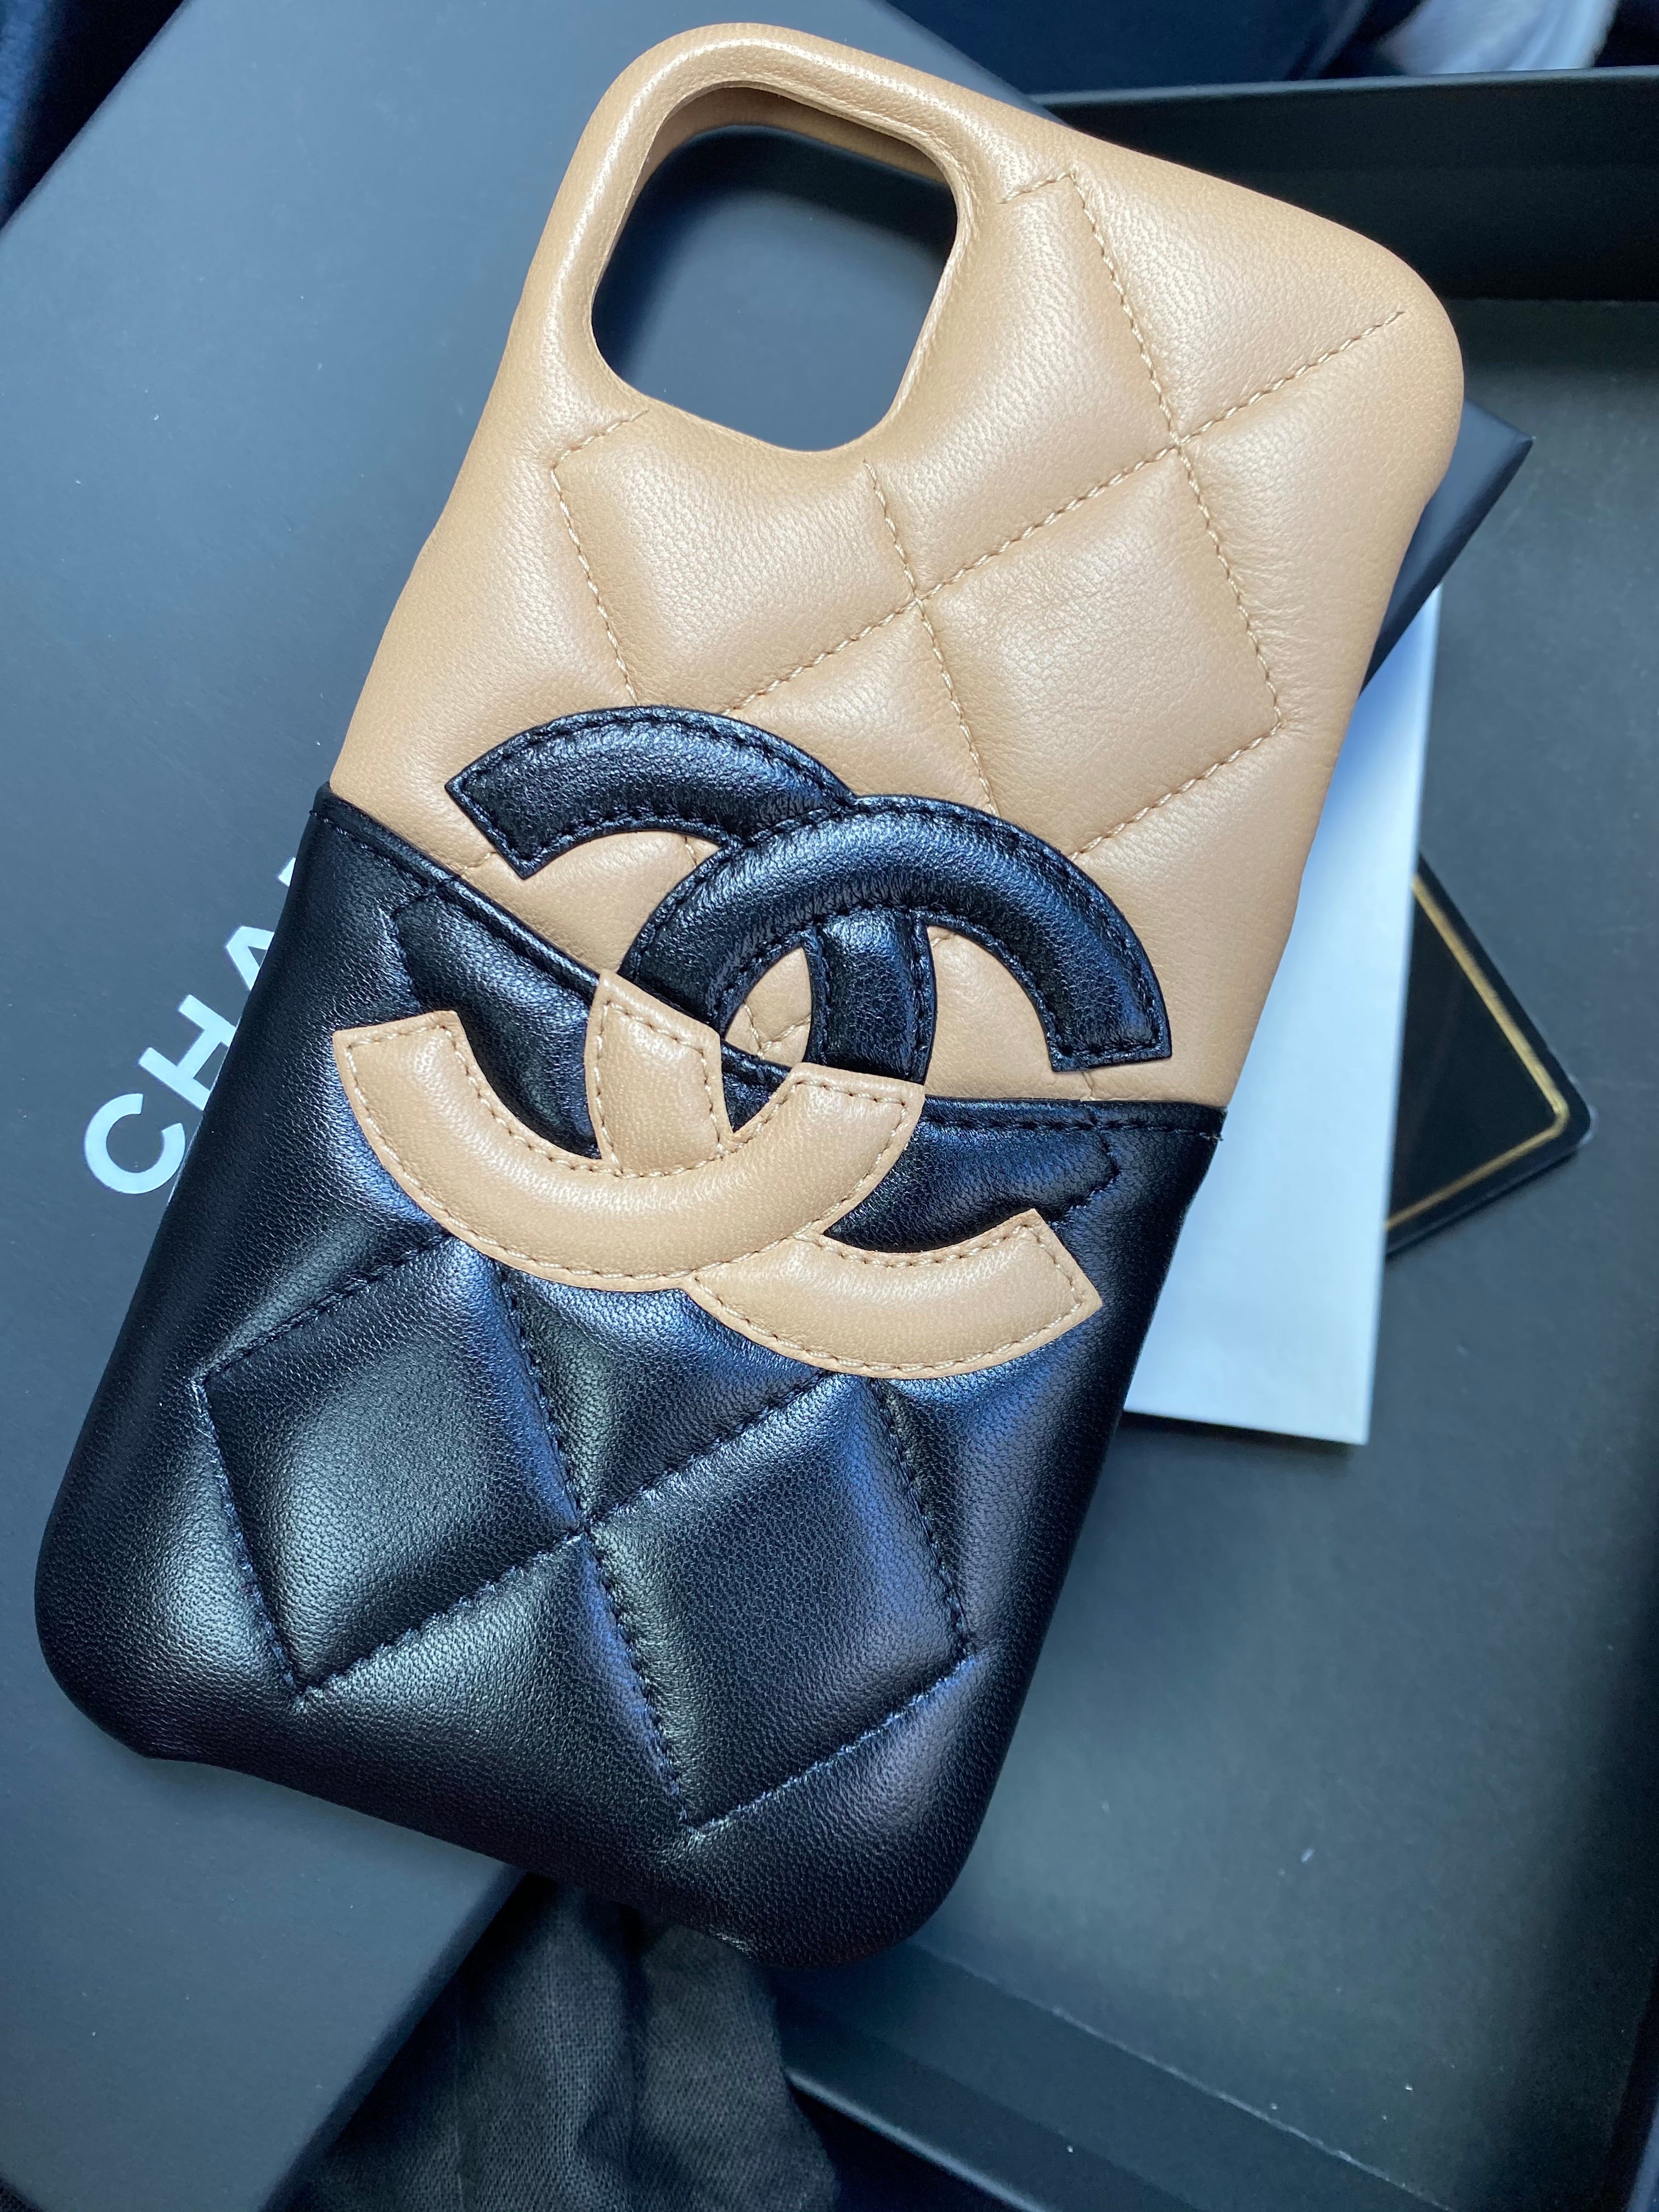 Chanel Pink Quilted Caviar Classic iPhone 11 Pro Max Case Chanel | The  Luxury Closet